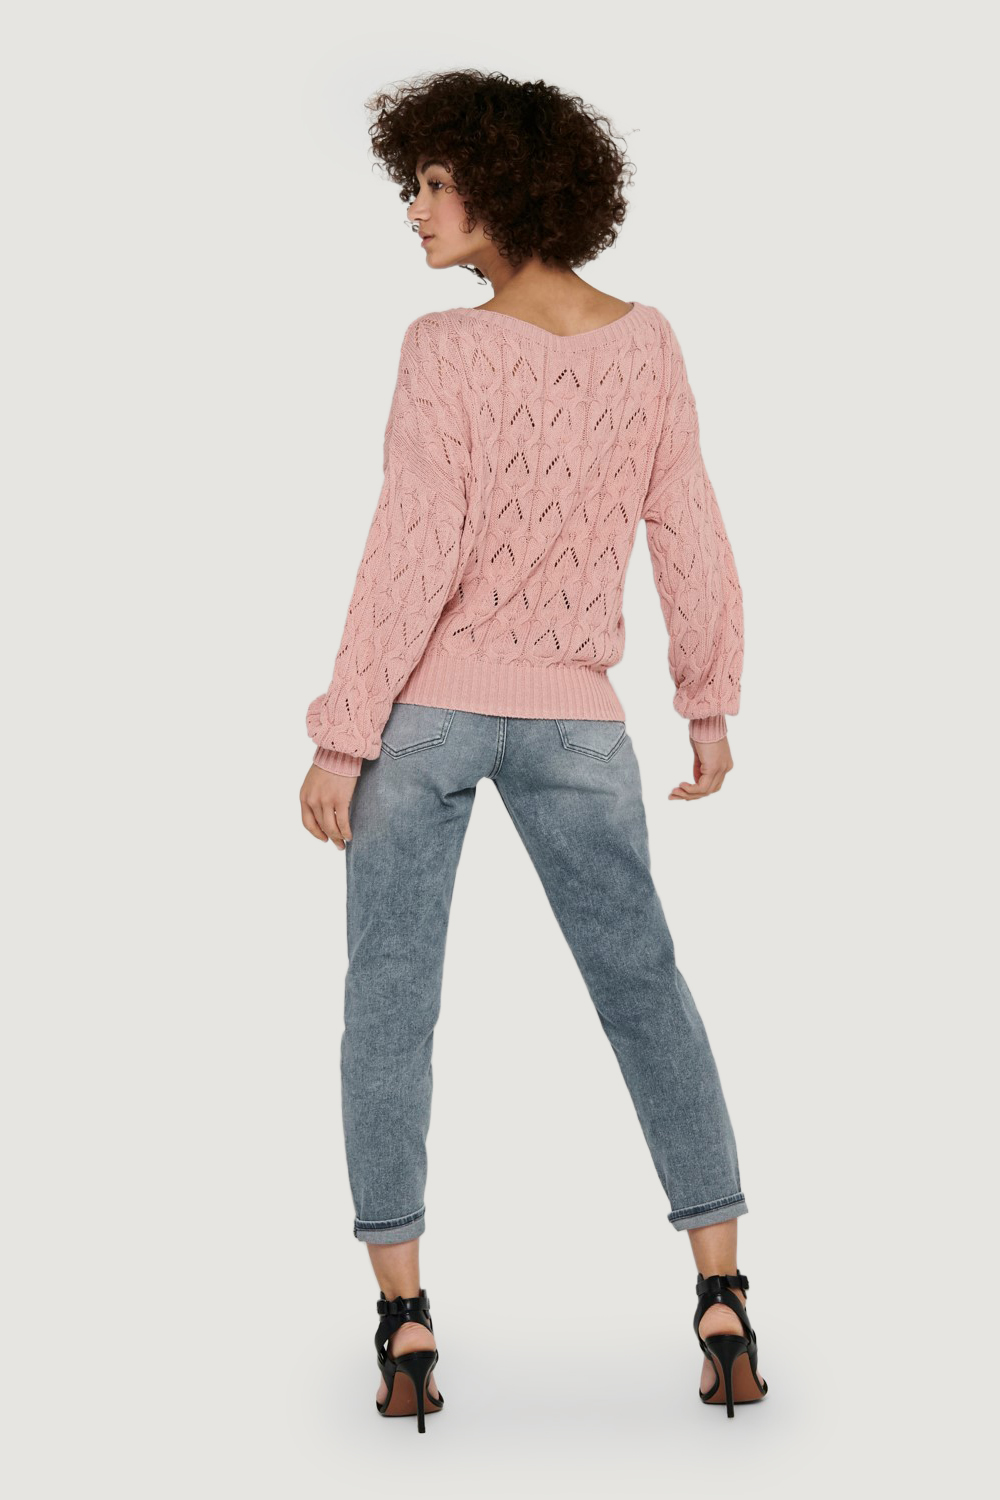 Maglione Only BRYNN LIFE STRUCTURE L/S PUL KNT NOOS Rosa - Foto 4